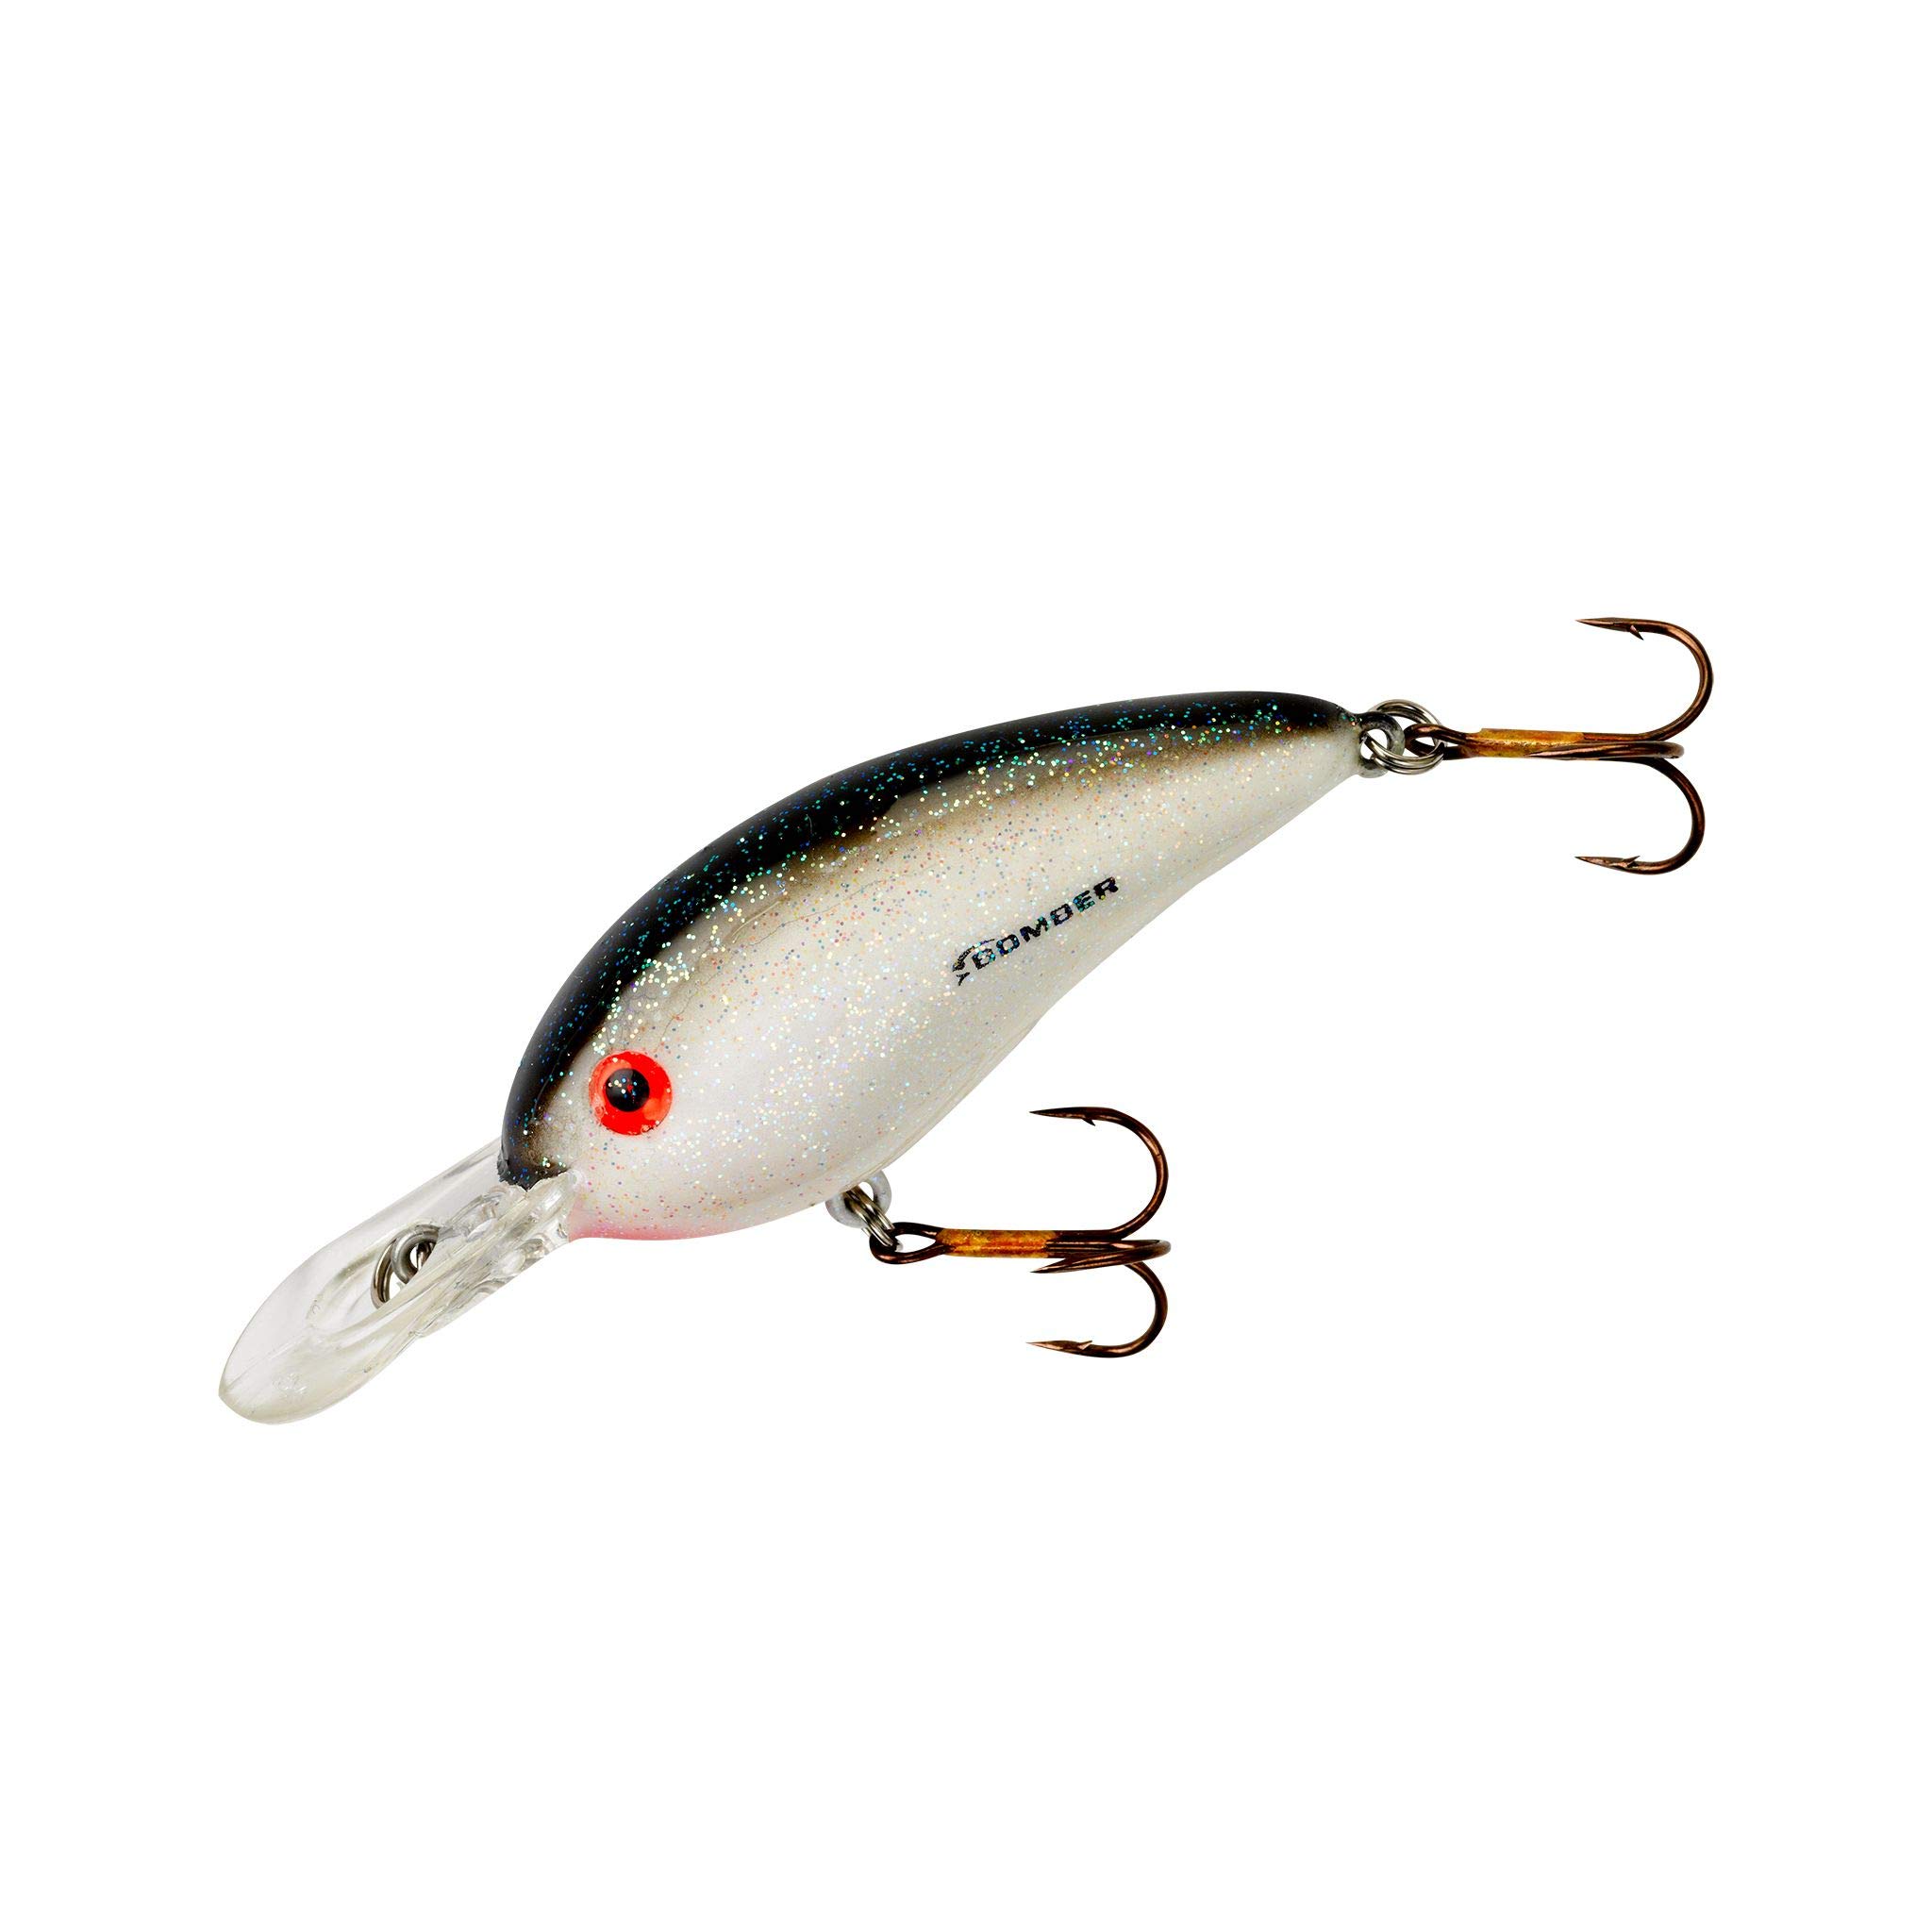 Lot 15 New Assorted Bomber Square A Fat Free Bandit Crankbait Fishing Lures  #2 – IBBY